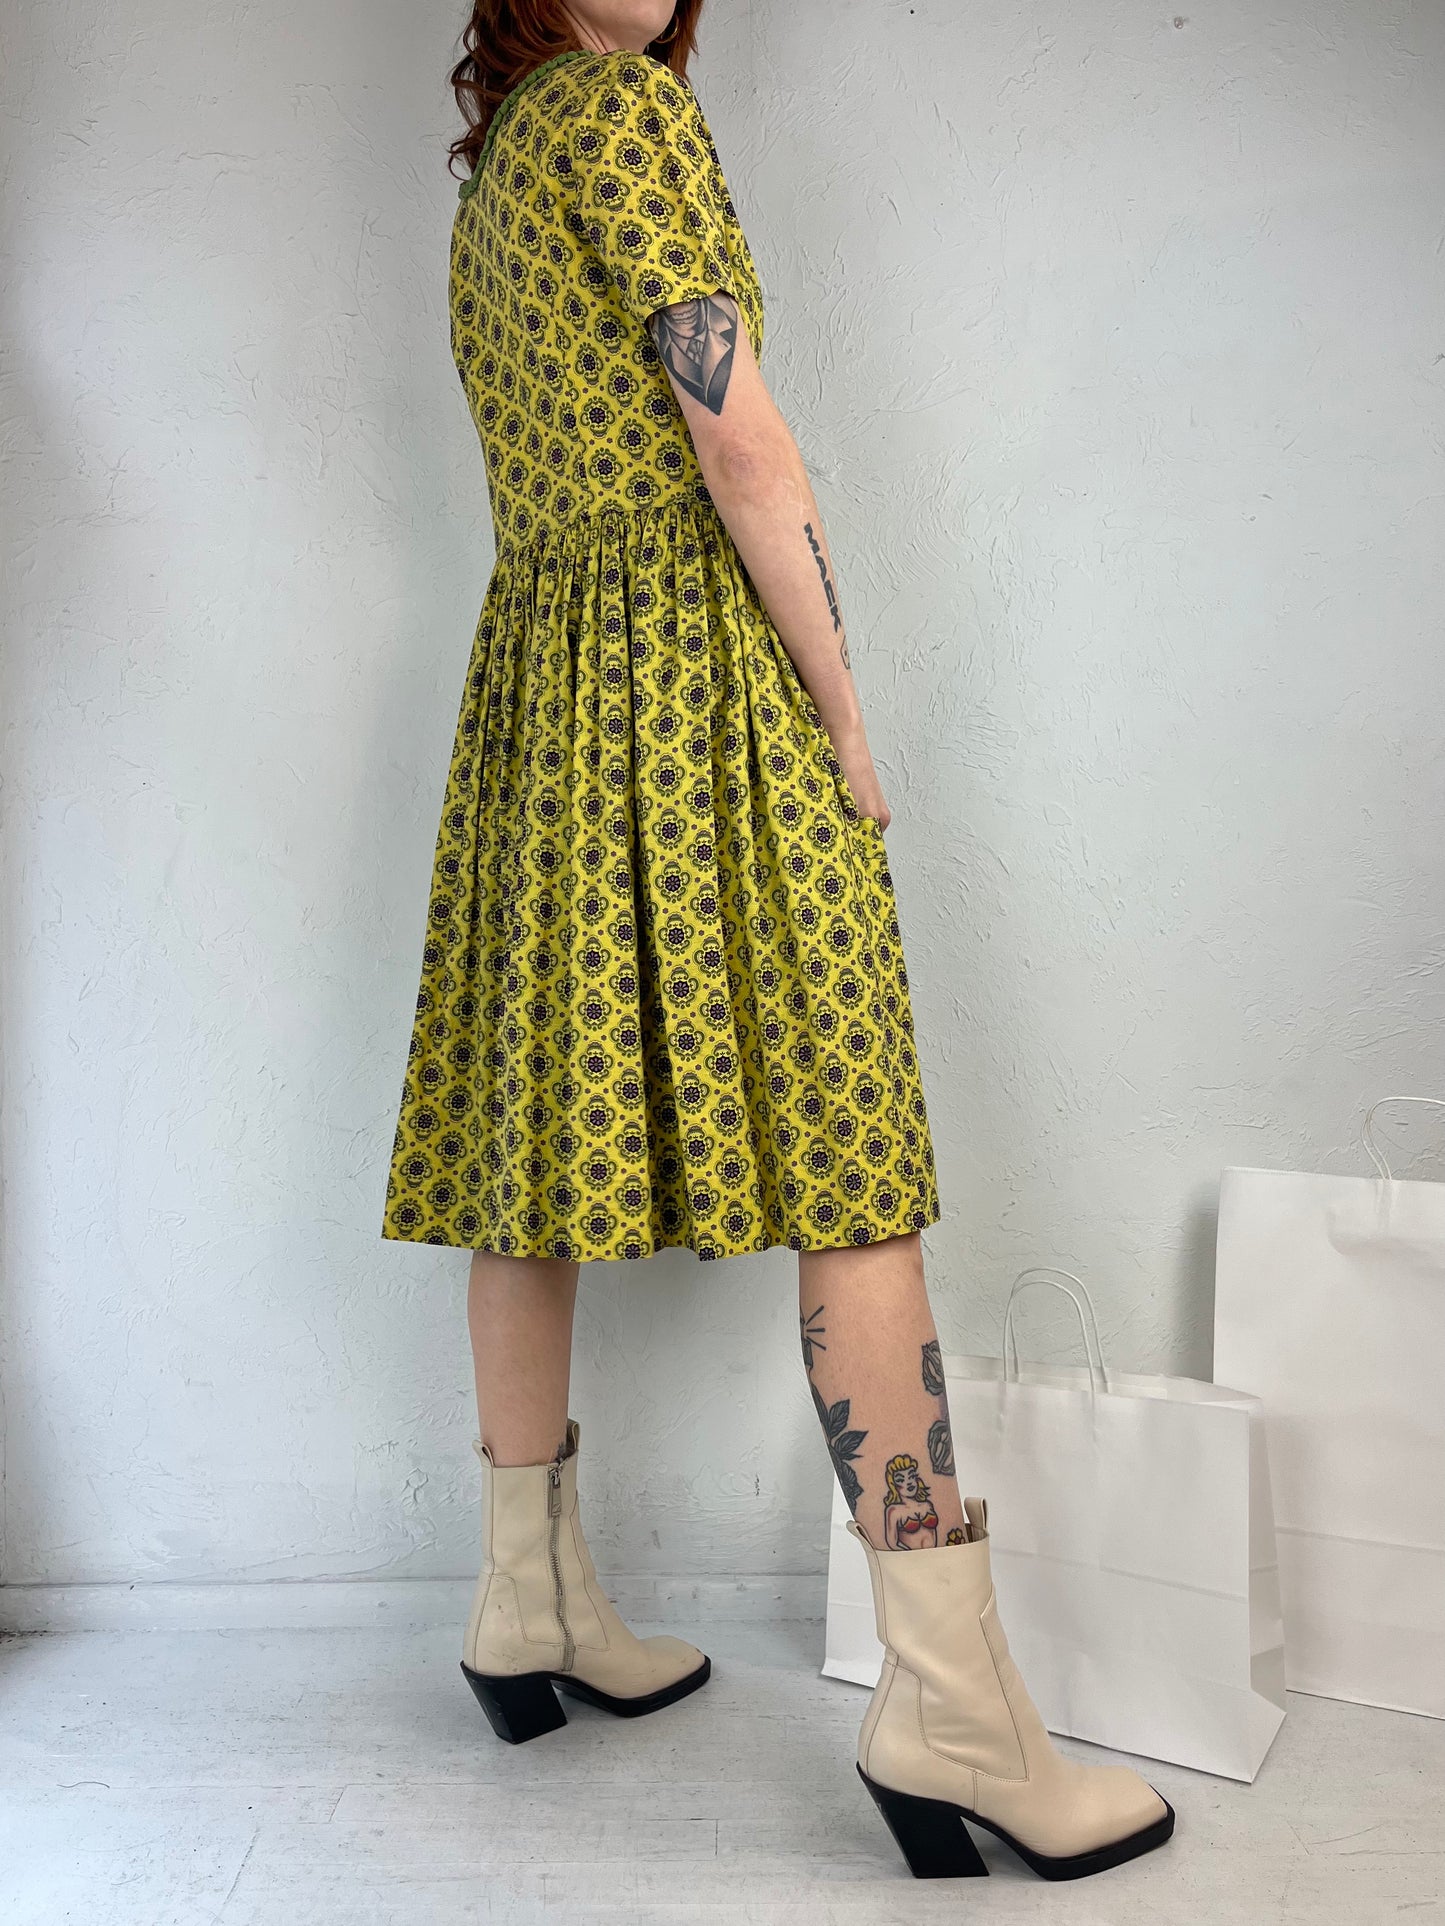 60s Handmade Yellow Patterned Day Dress / Small